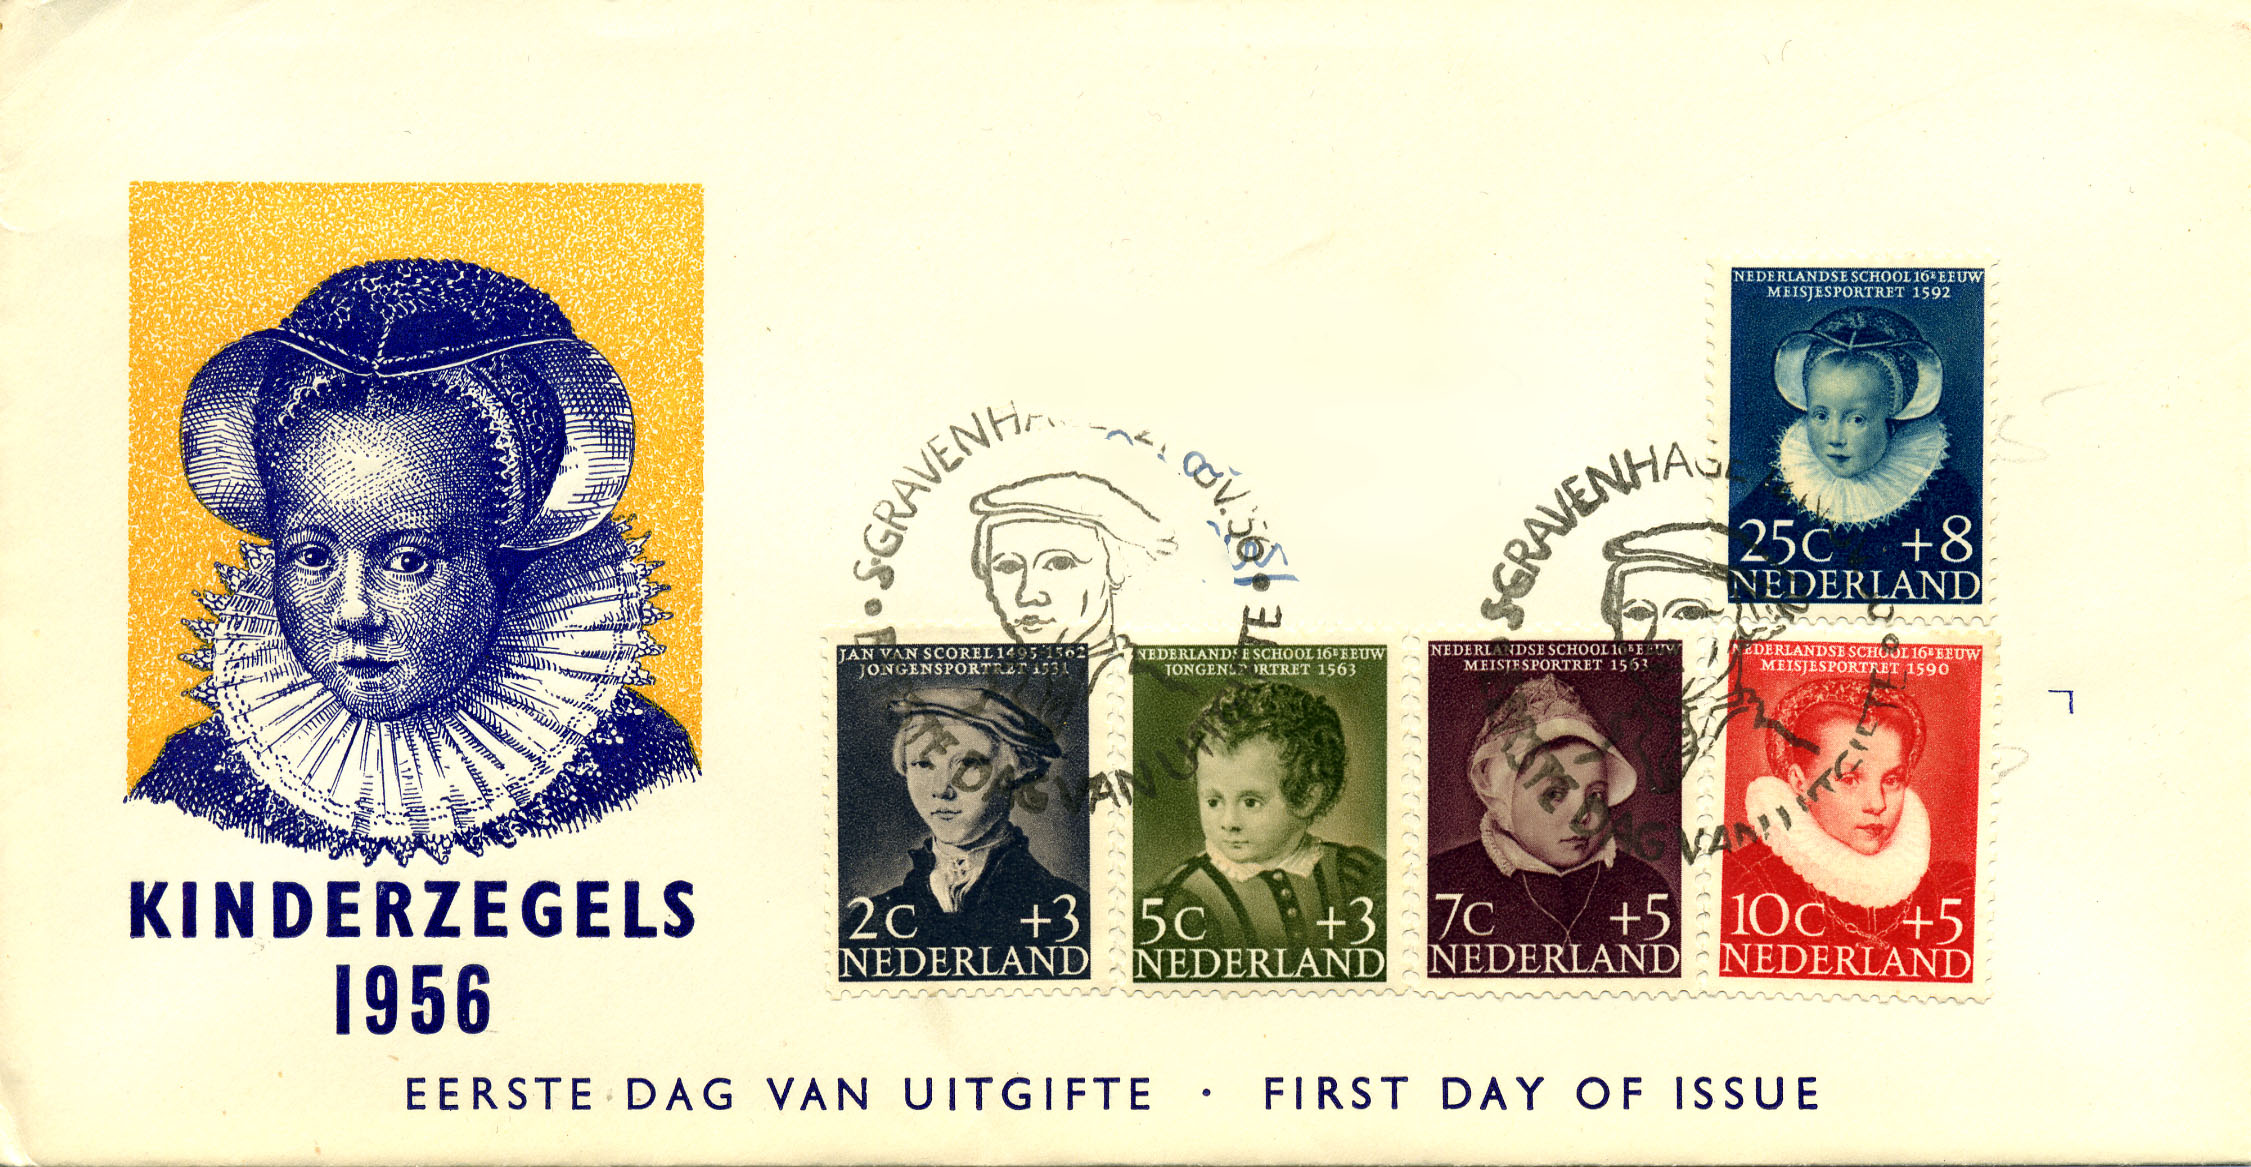 First day cover 1956 kinderzegels